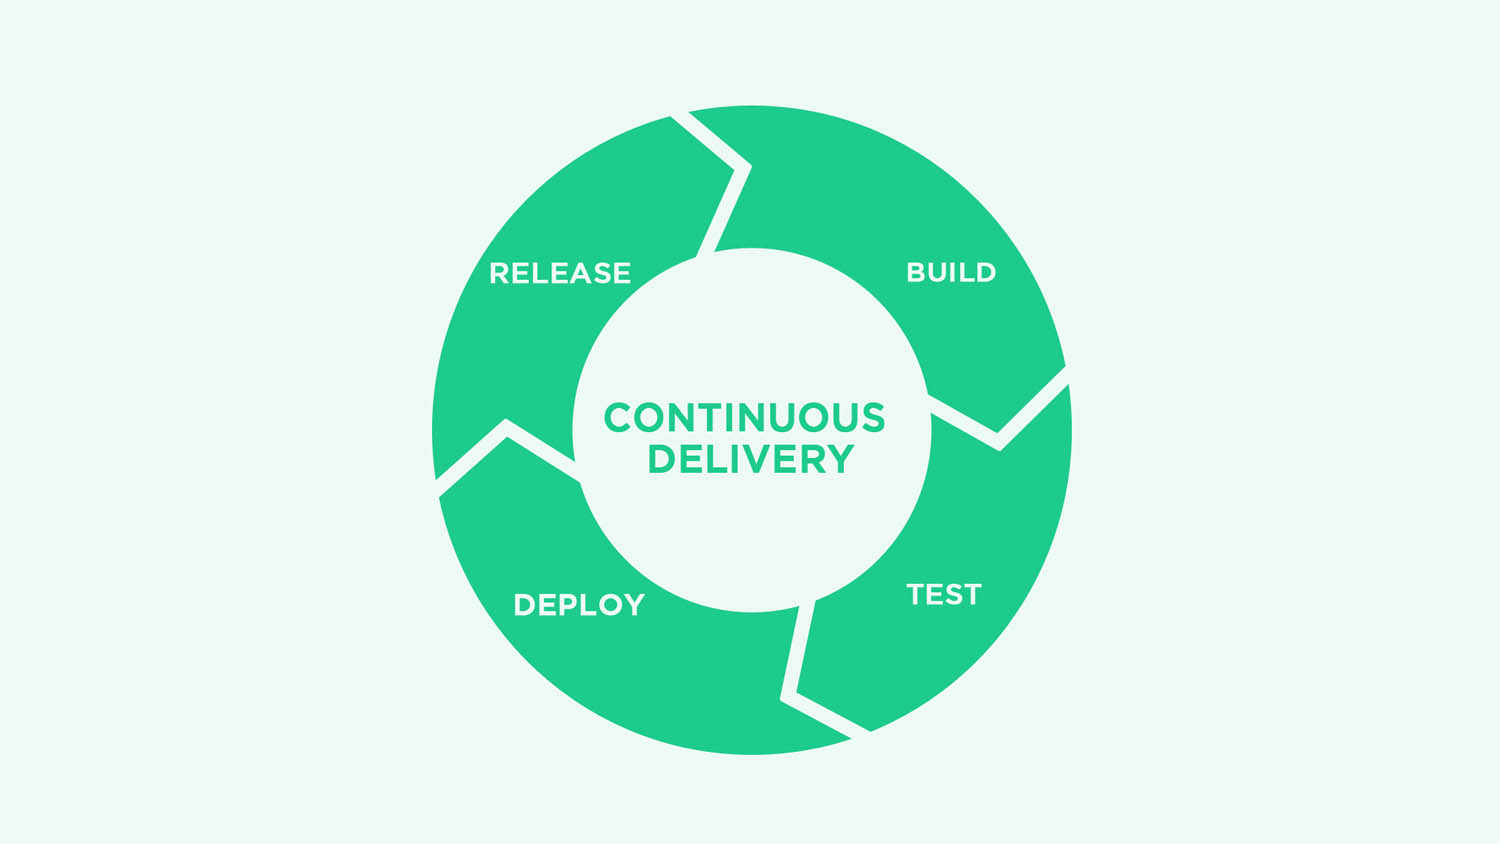 Is Manual Testing becoming a bottleneck in your Continuous Delivery?